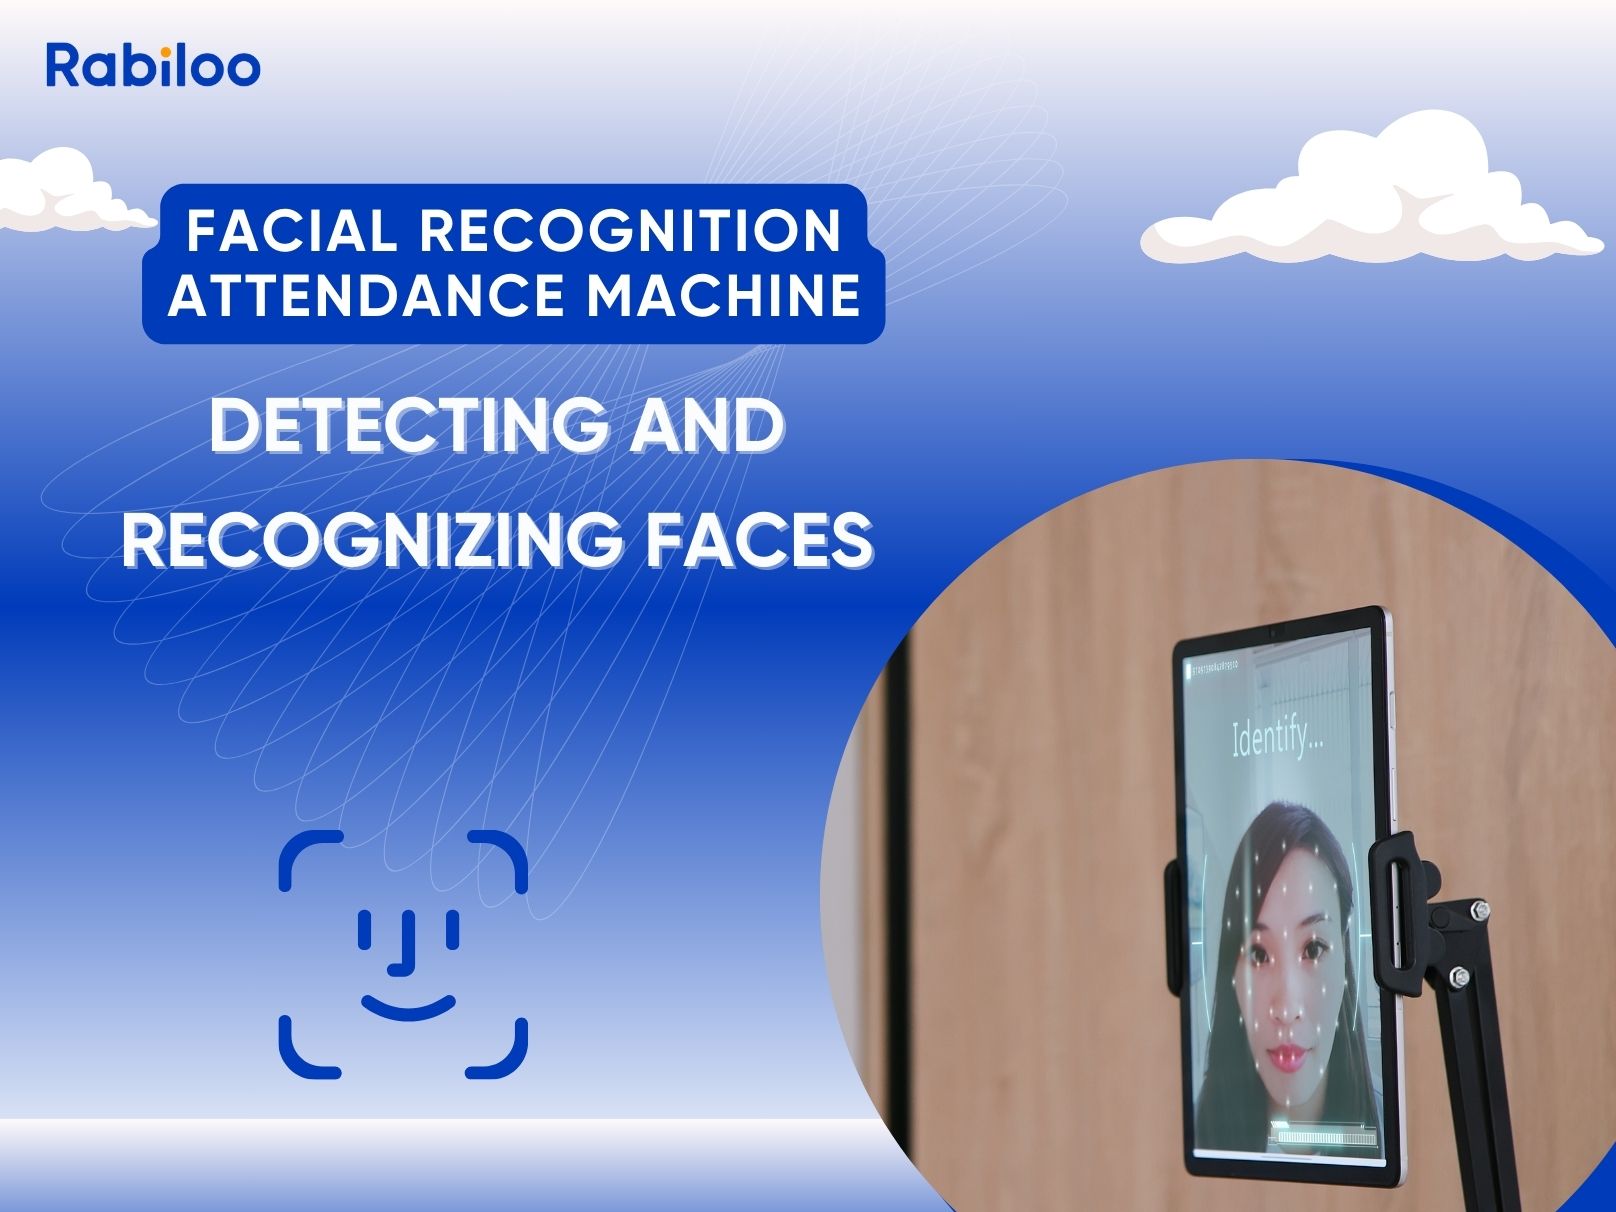 Detecting faces and recognizing them in a facial recognition attendance machine.